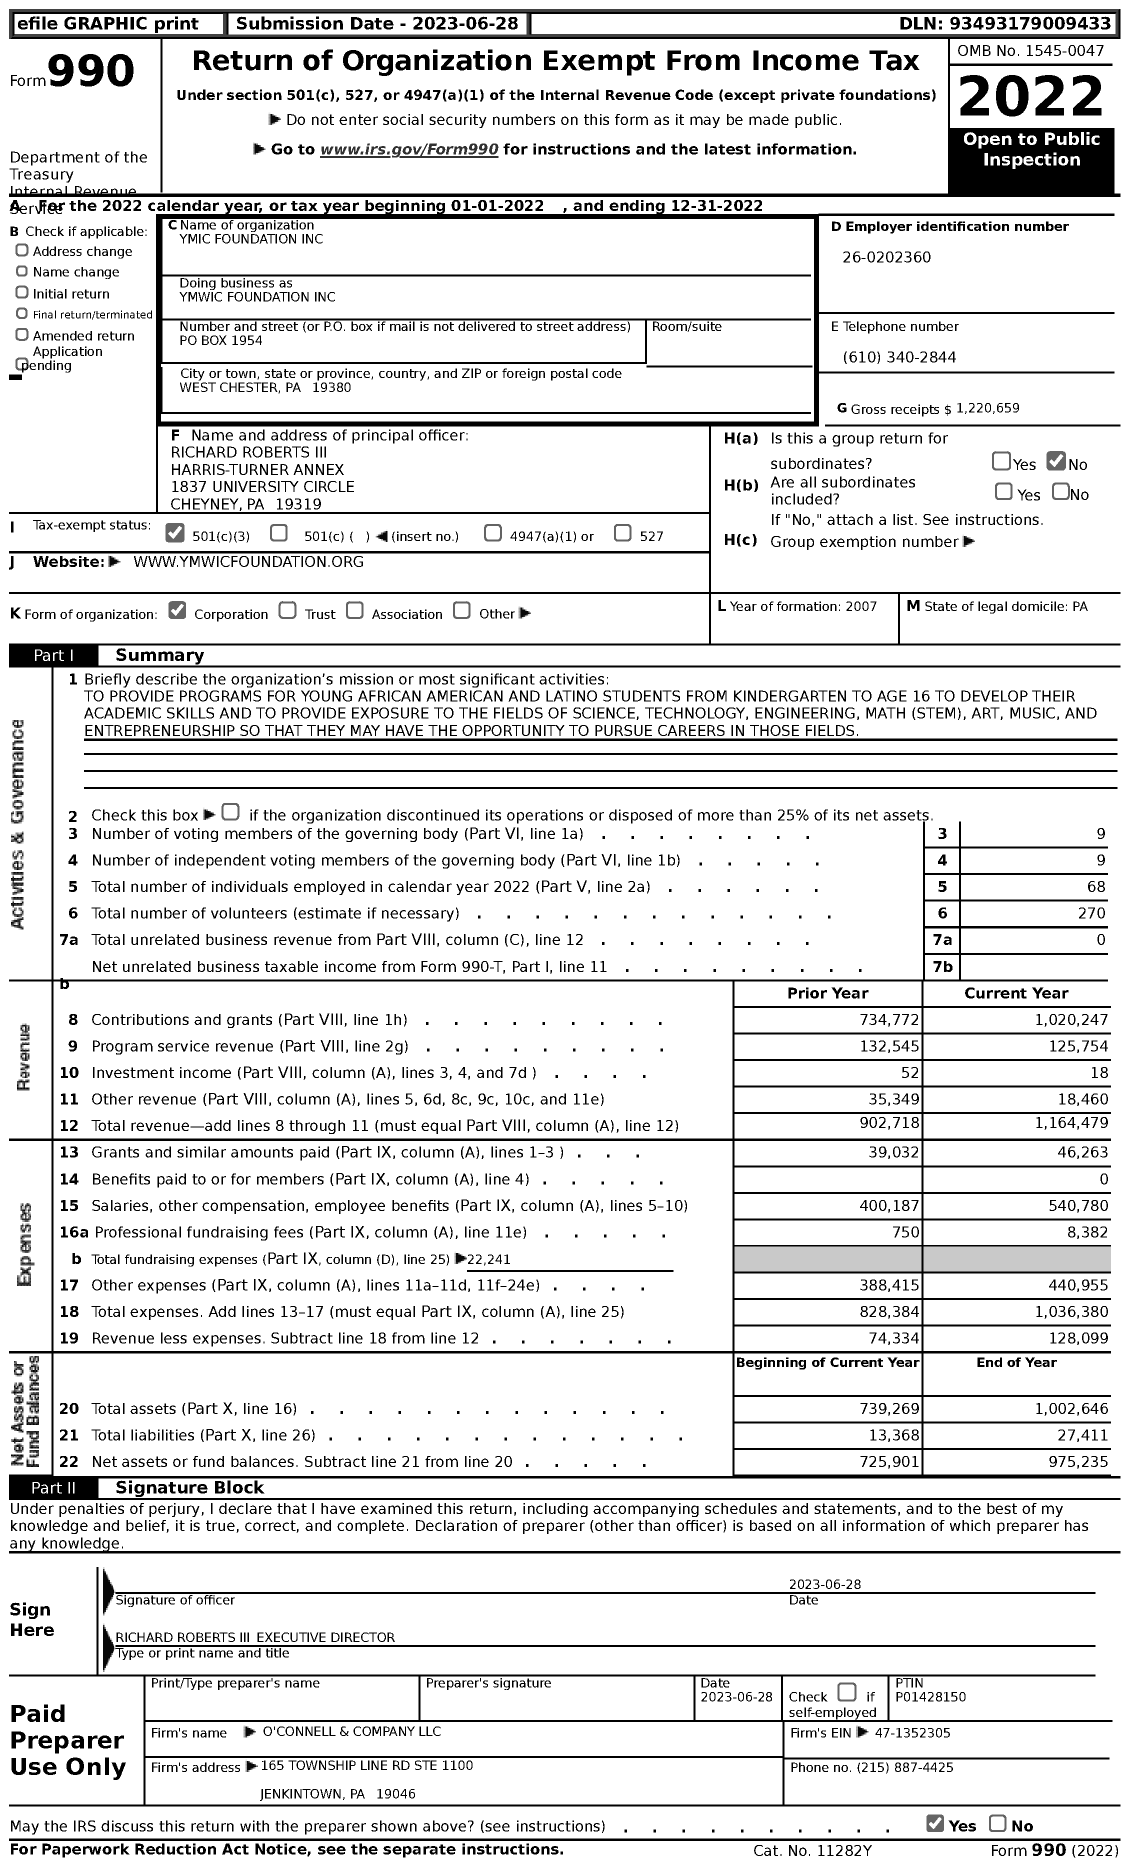 Image of first page of 2022 Form 990 for Ymwic Foundation